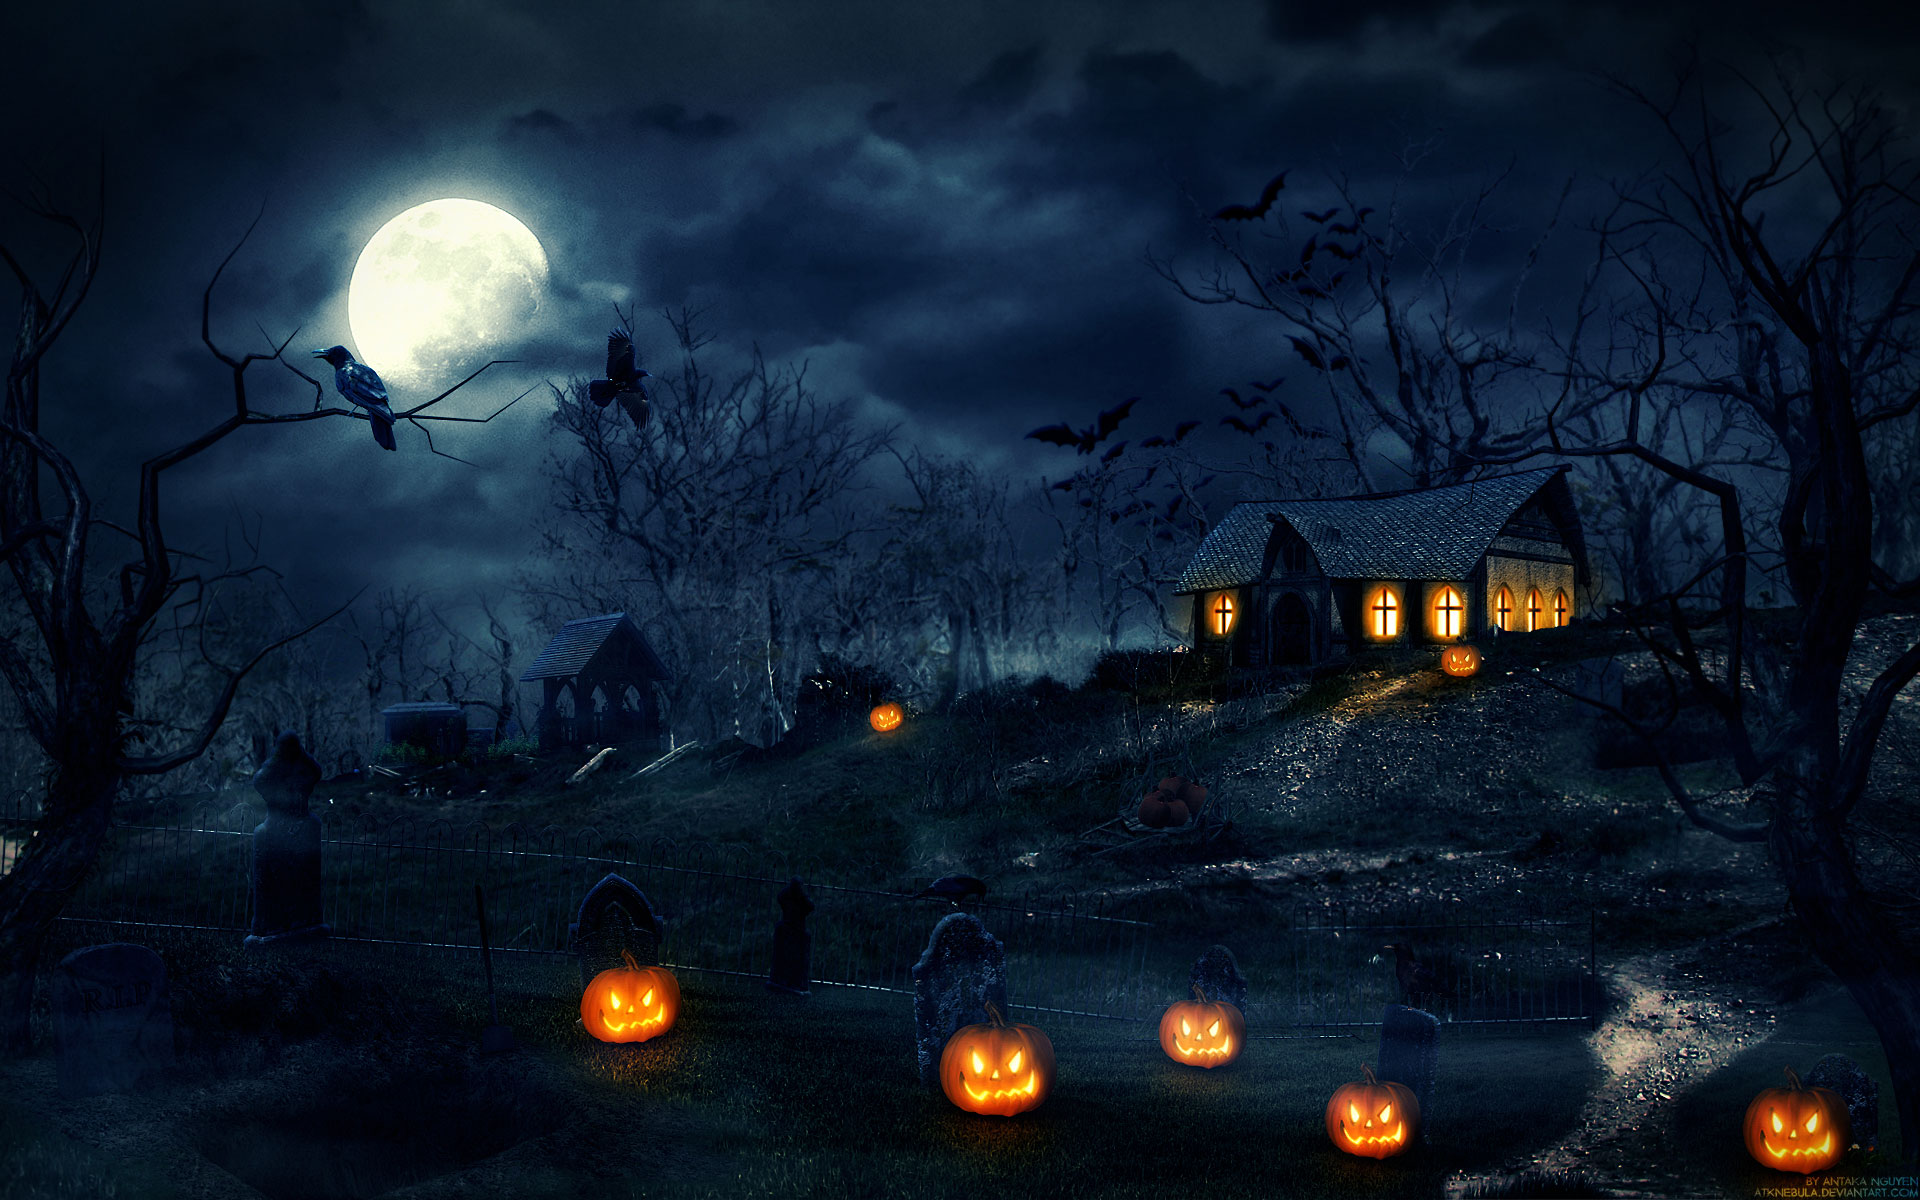  Scary Halloween Backgrounds Wallpaper Collection 2014 1920x1200